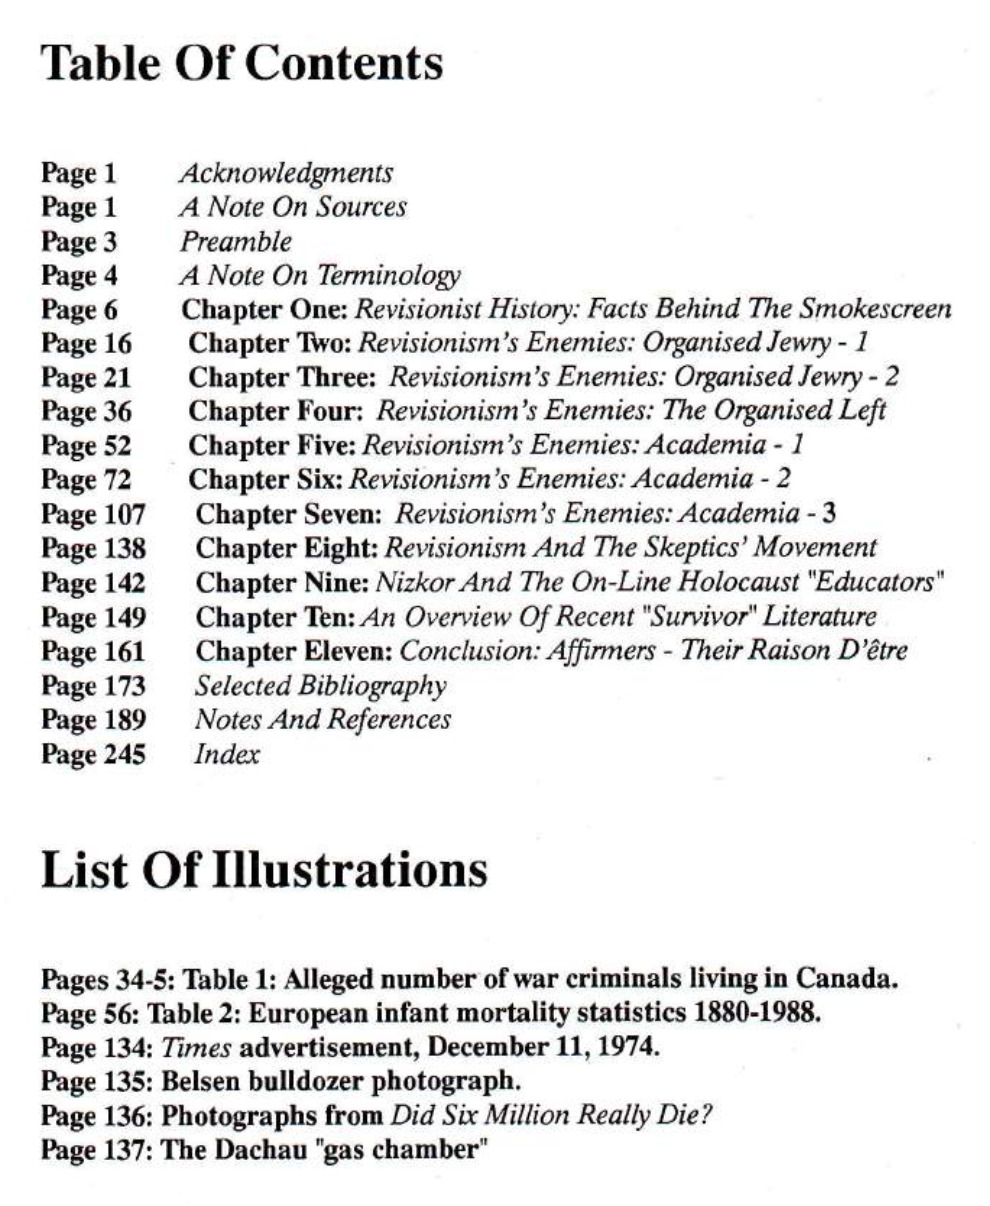 Table of Contents of Holocaust Affirmers